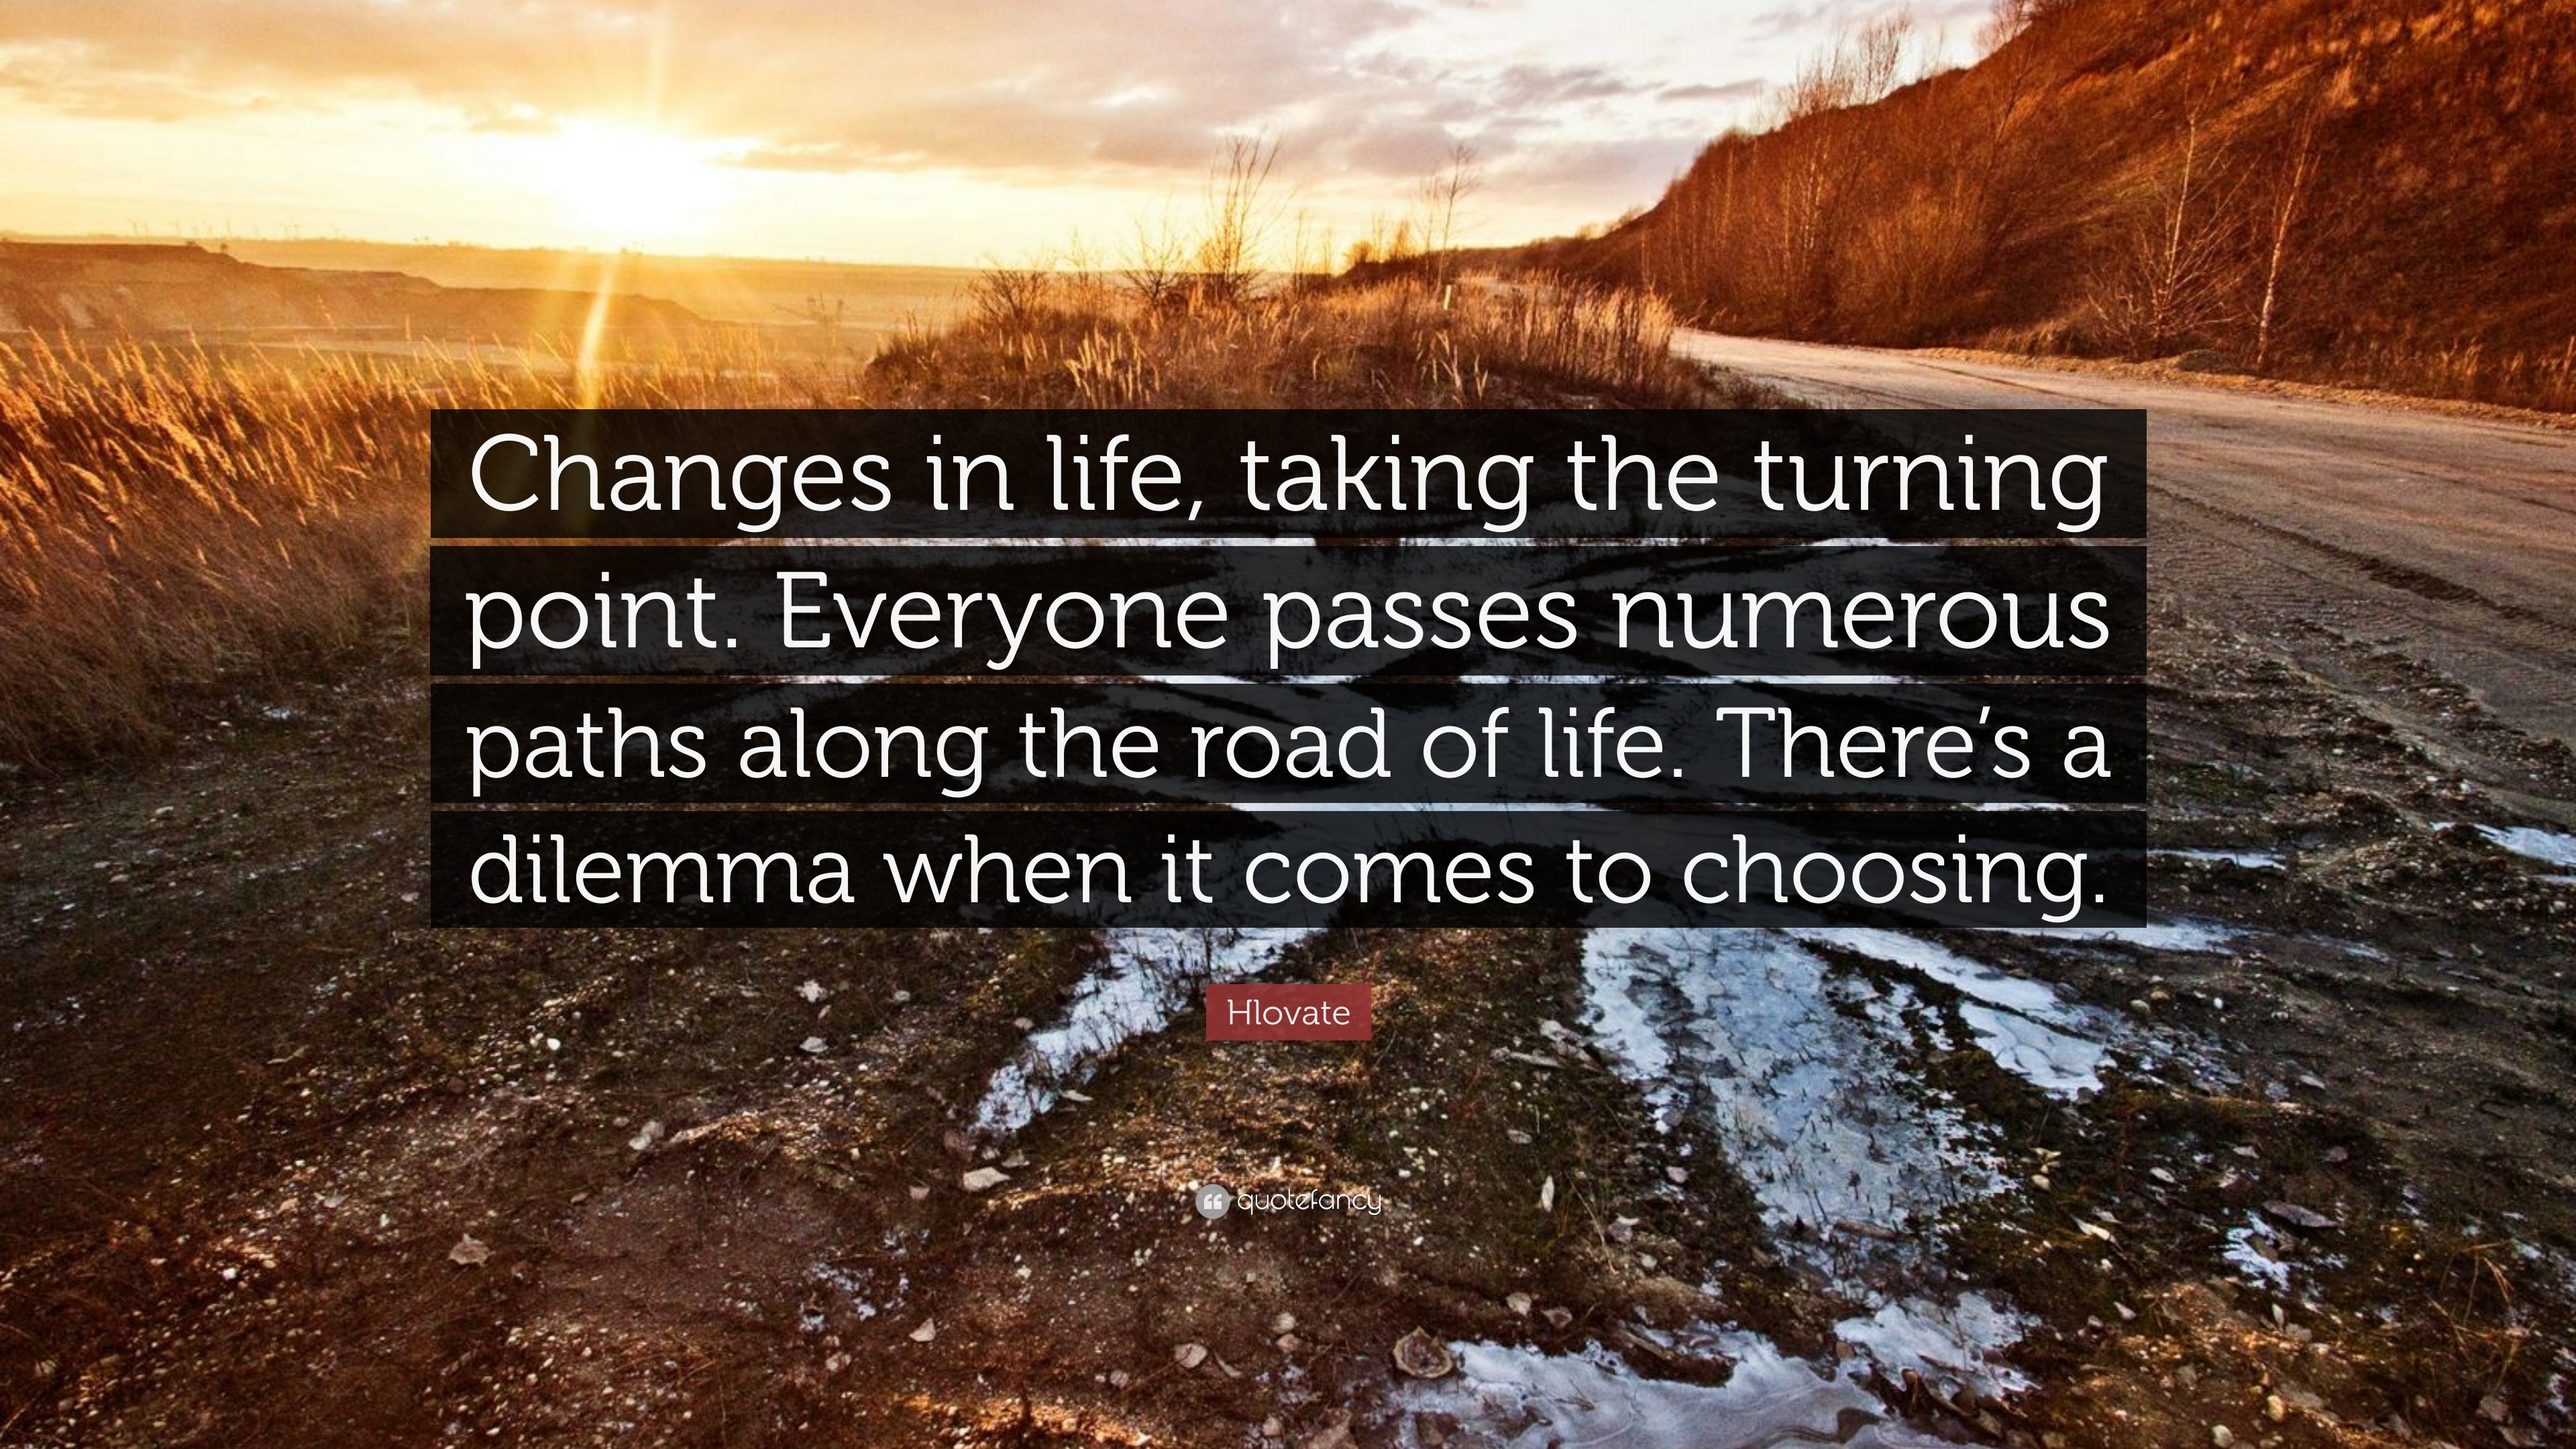 Hlovate Quote “Changes in life taking the turning point Everyone passes numerous